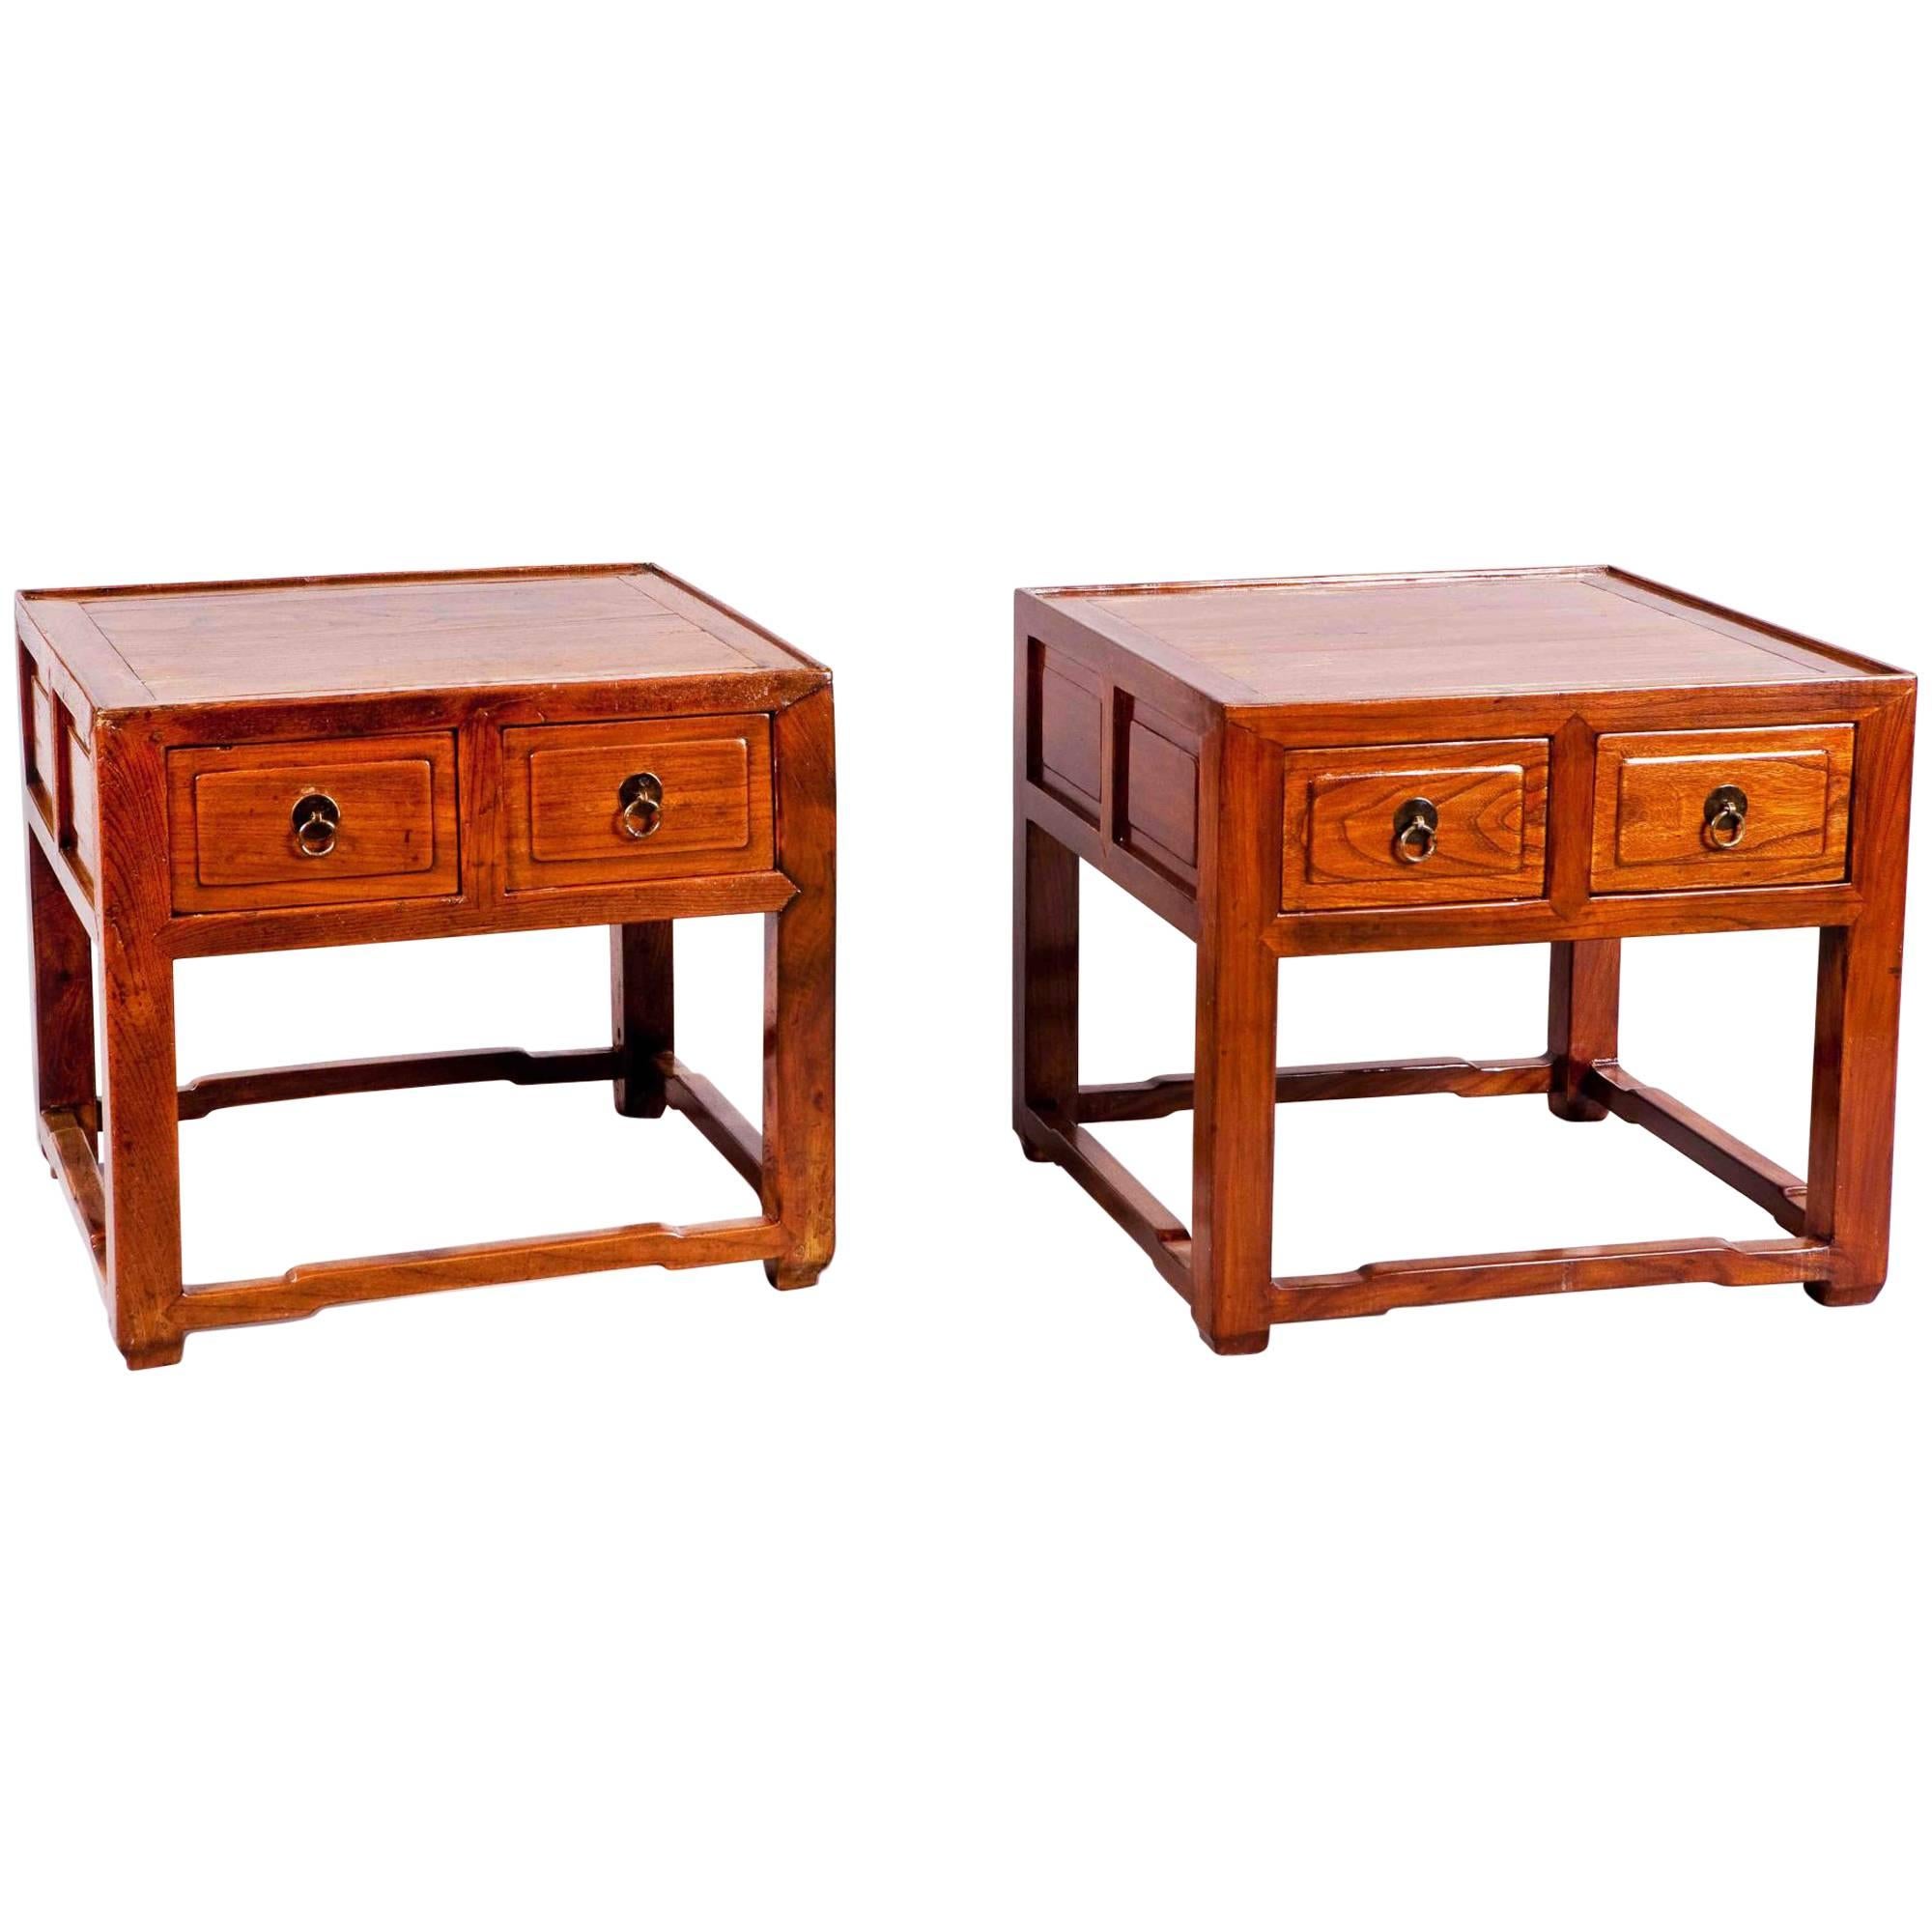 Pair of Side Tables with Drawers Chinese For Sale